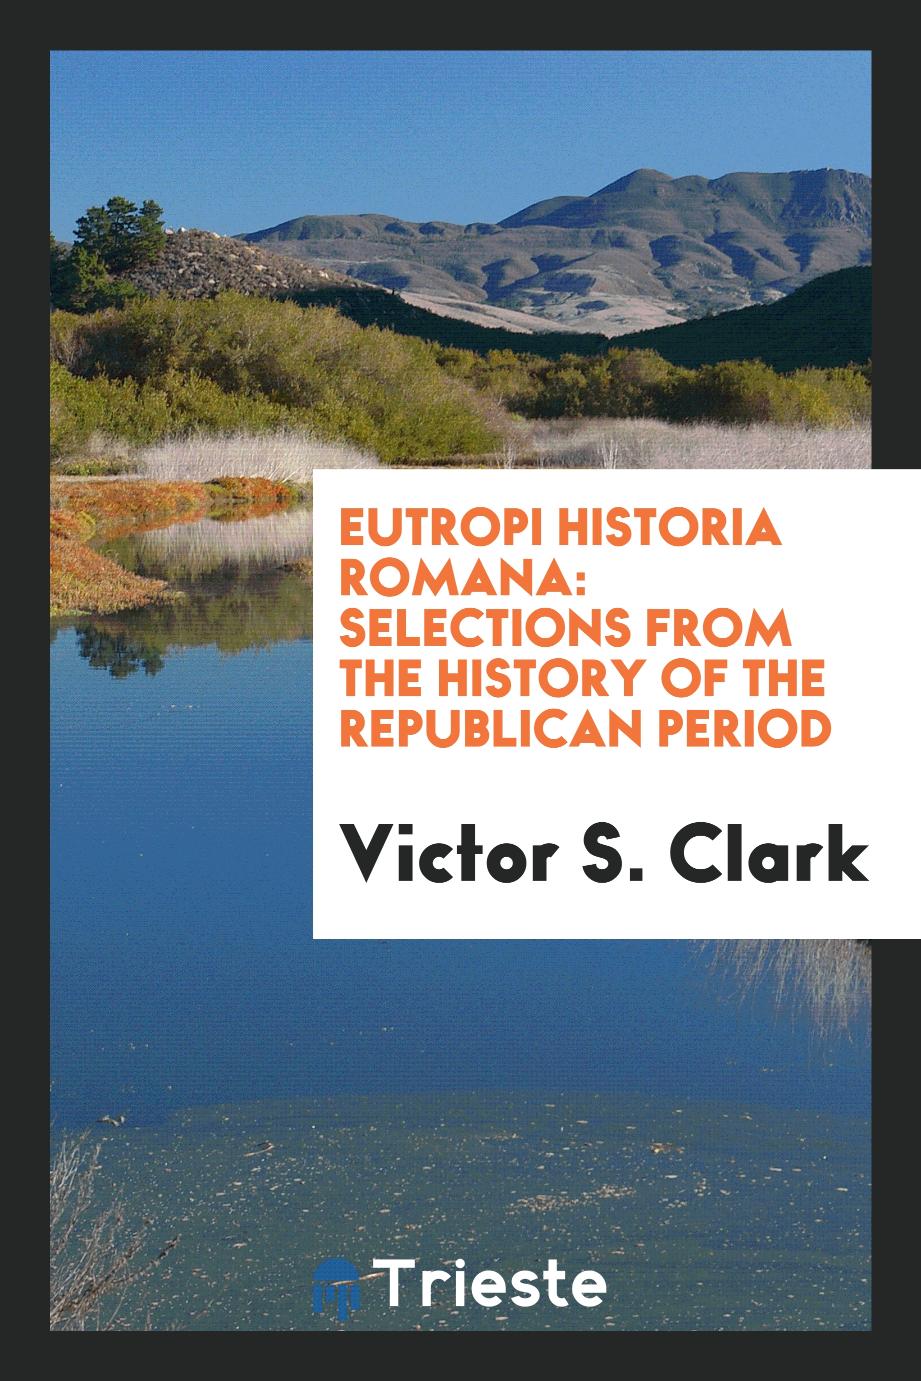 Eutropi Historia Romana: Selections from the History of the Republican Period